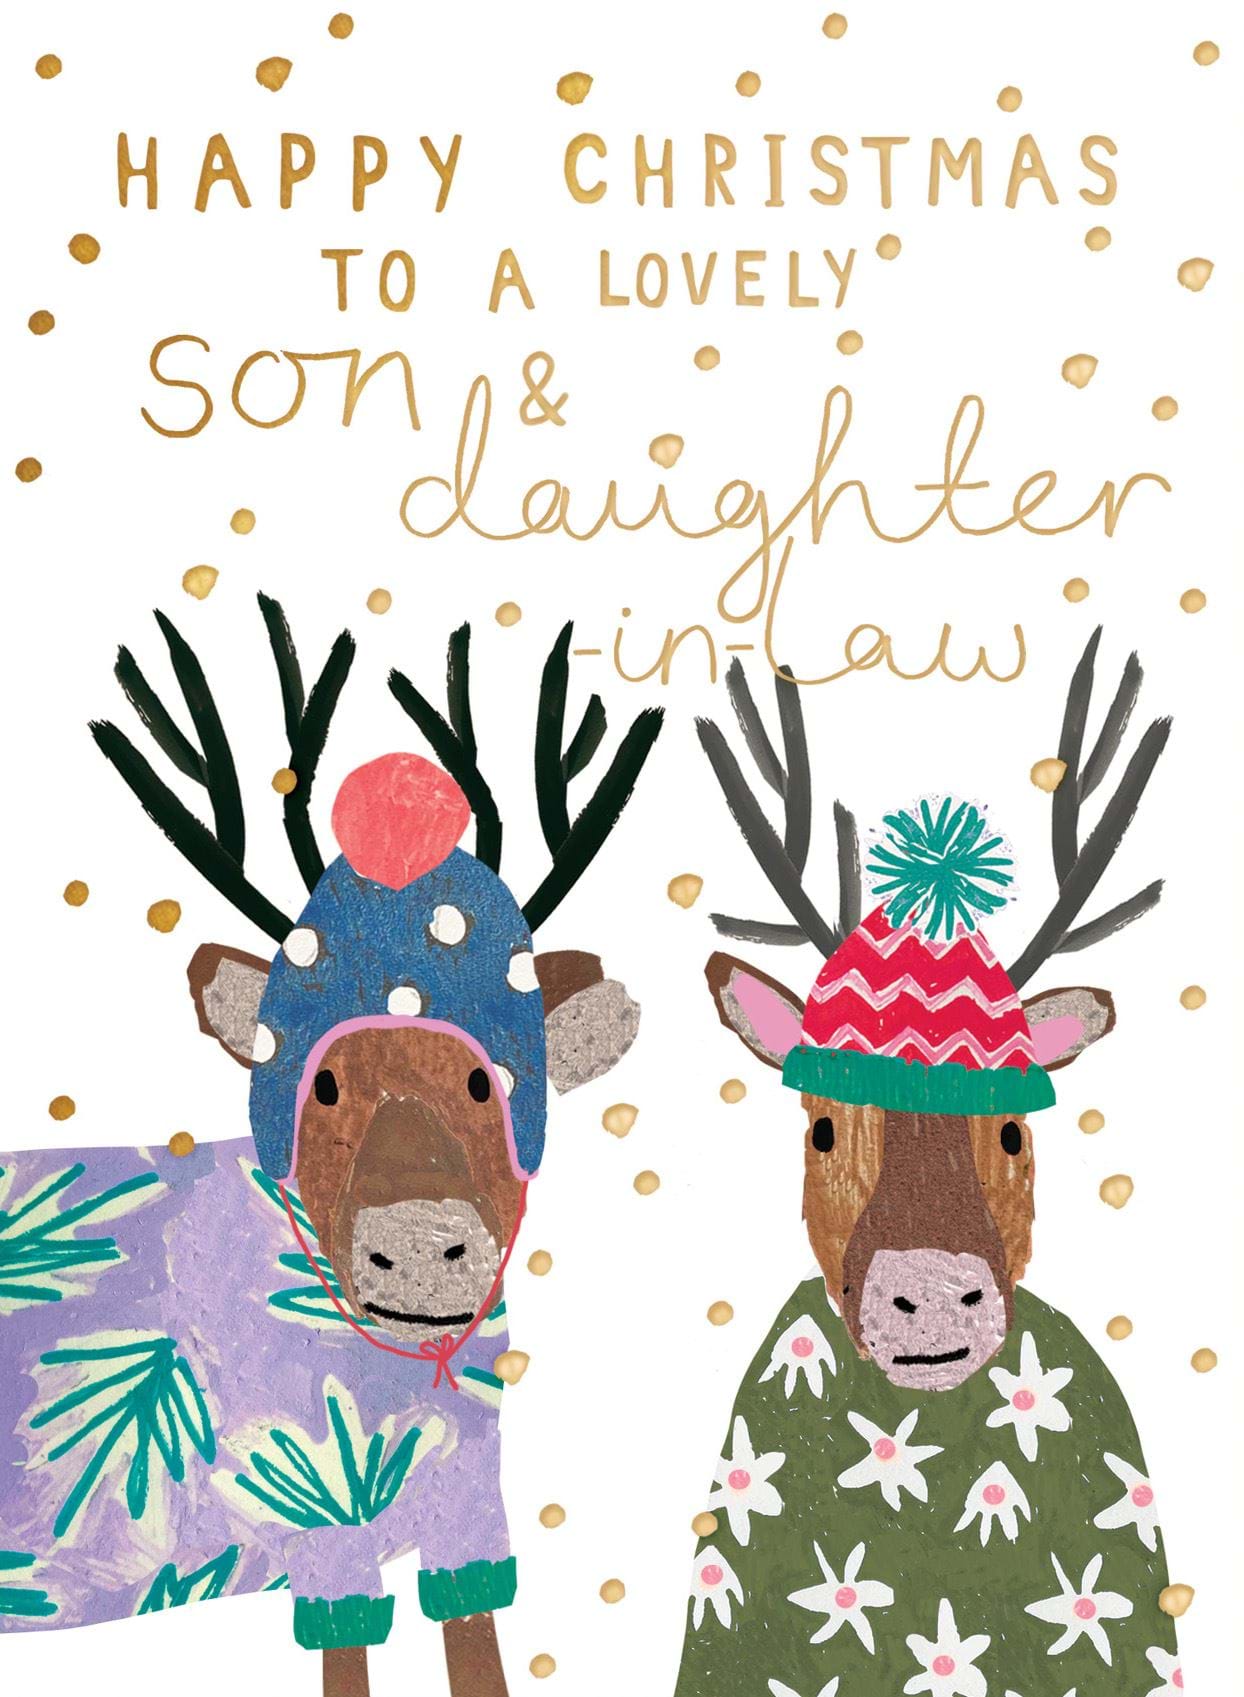 Deer Hats Son and Daughter-in-law Christmas Card